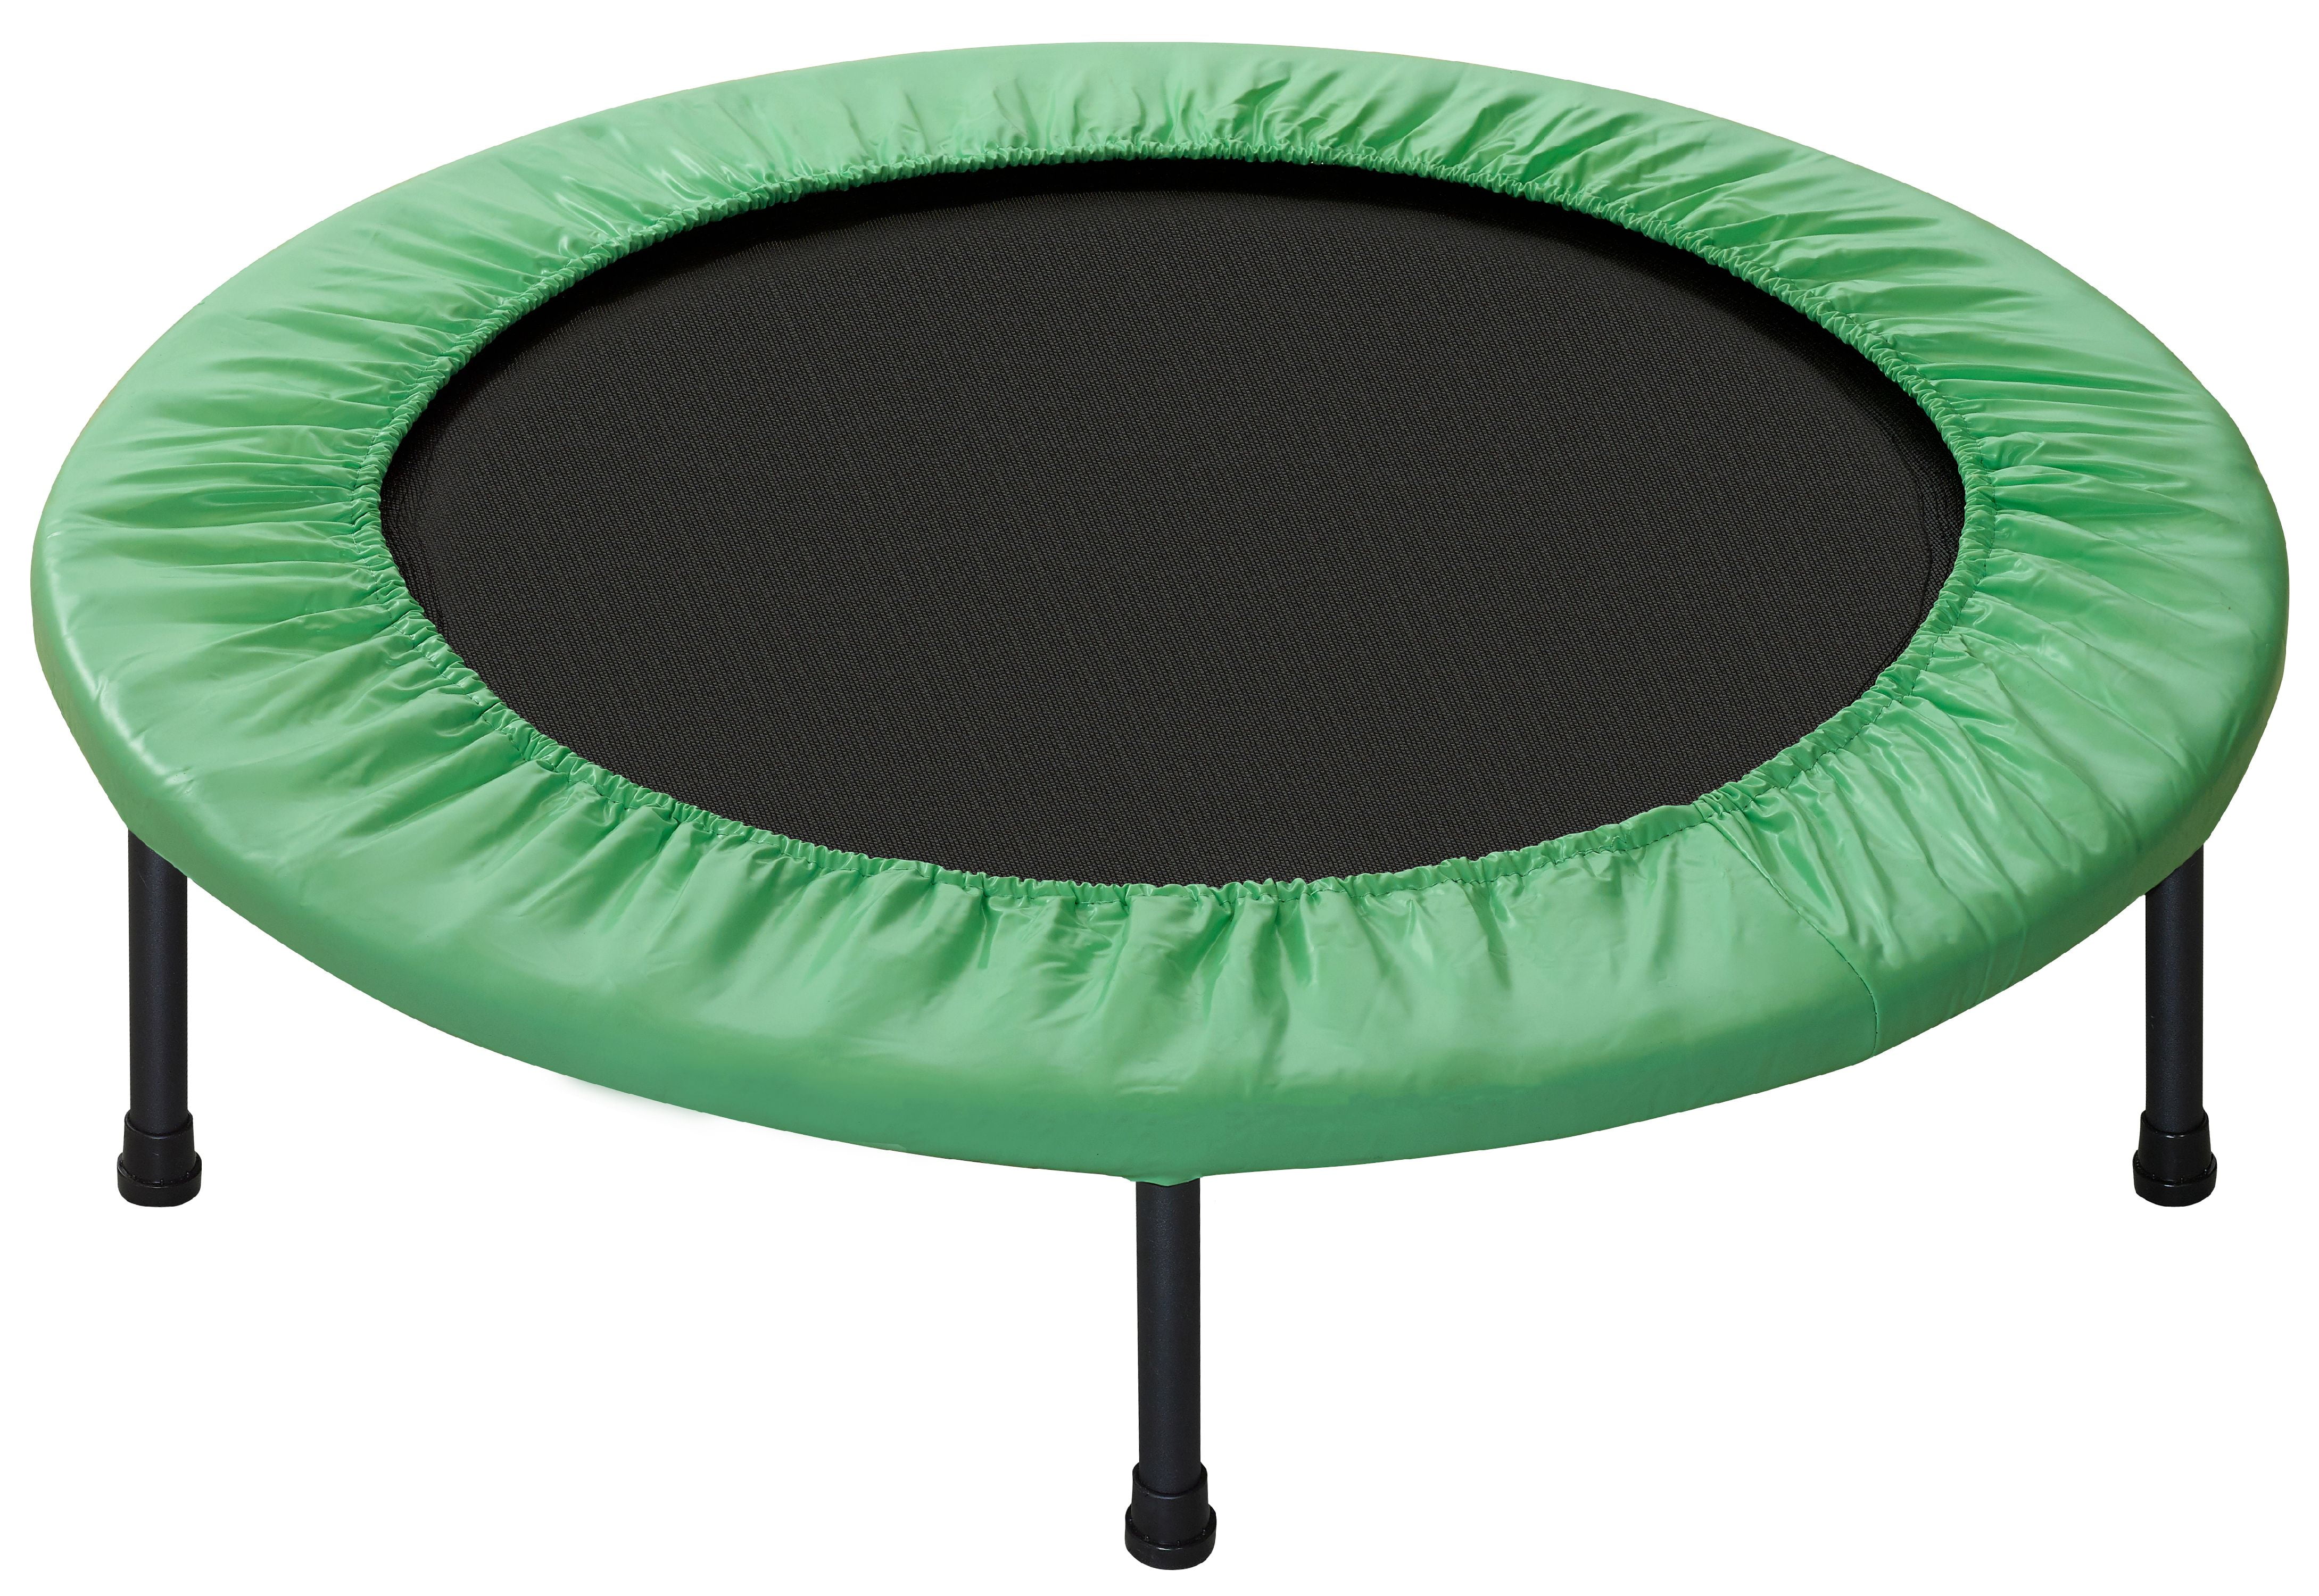 Upper Bounce Trampoline Super Spring Cover - Safety Pad, Fits 8 FT Round  Trampoline Frame - Green UBPAD-S-8-G - The Home Depot